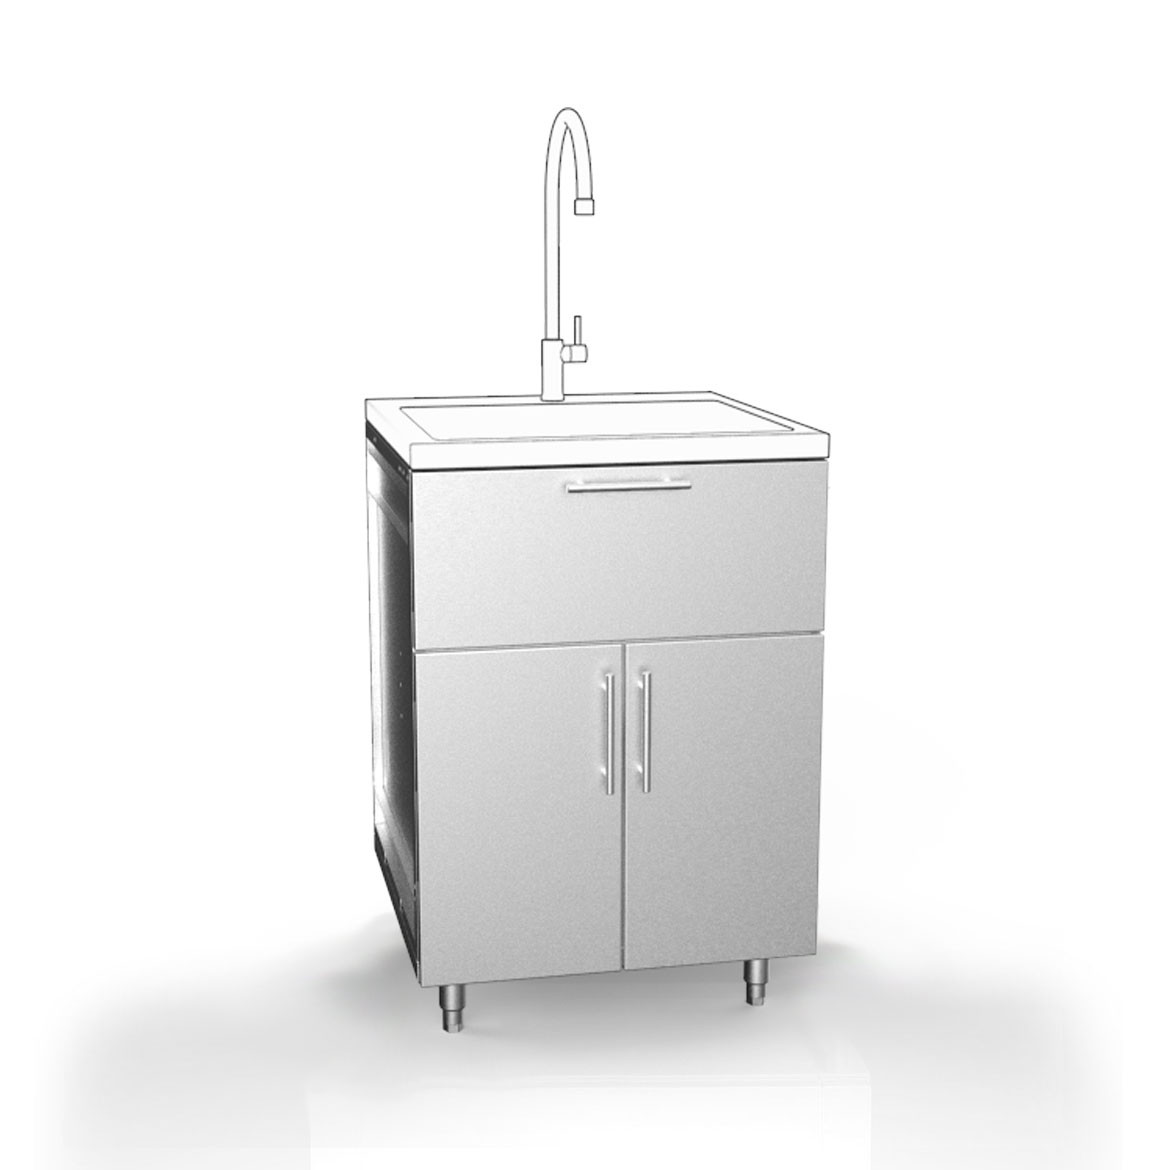 Outdoor Kitchen Sink And Cabinet
 Stainless Steel Cabinets Outdoor Cabinets